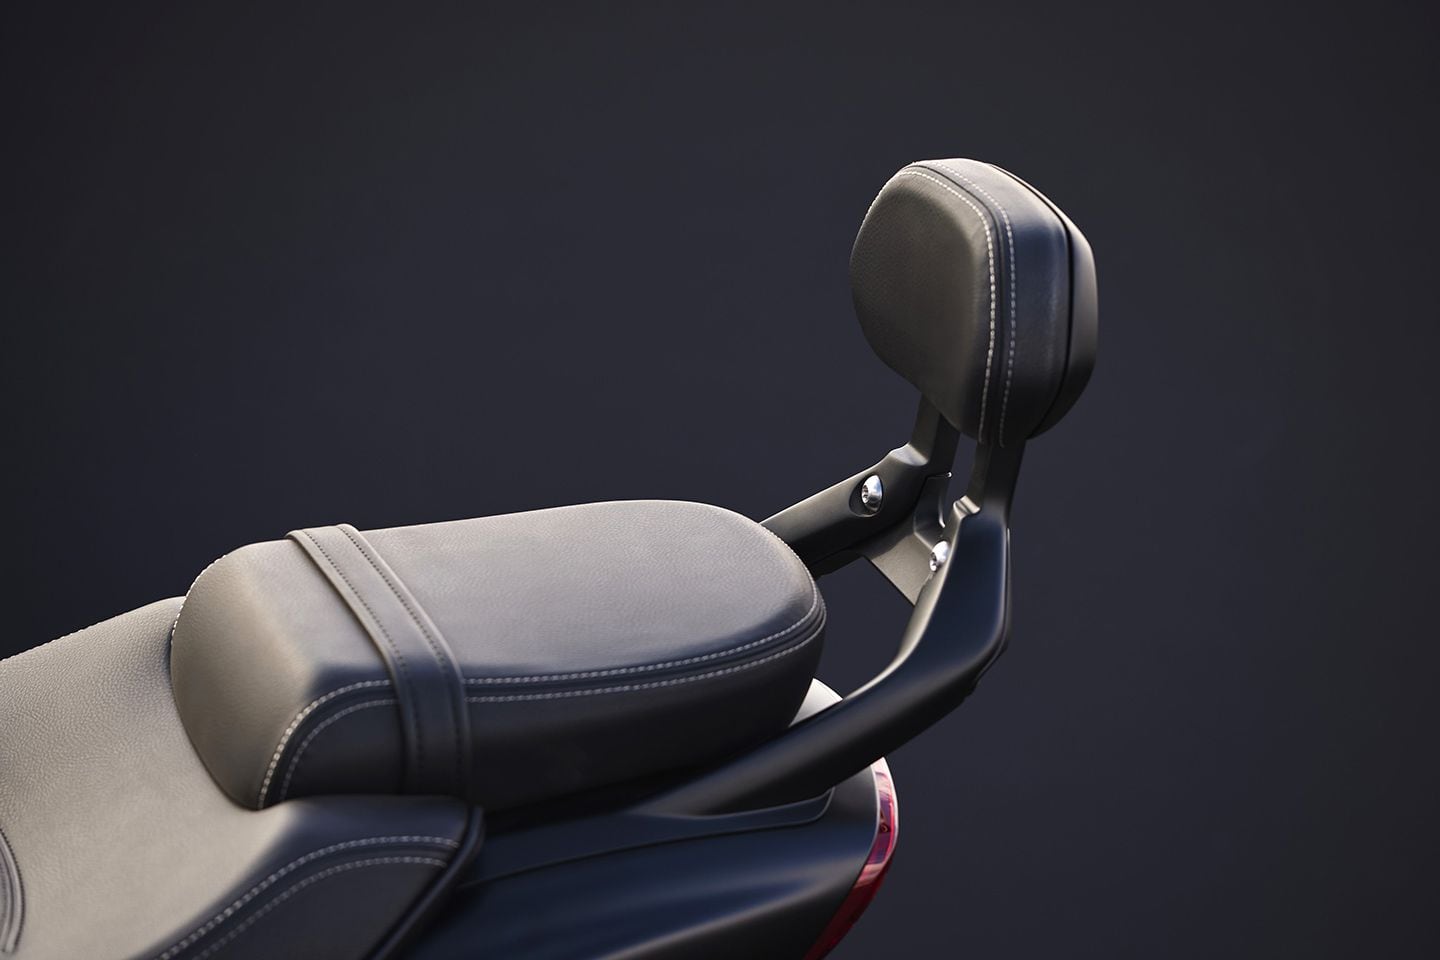 The Storm GT also adds a padded passenger seat and adjustable backrest as well as heated grips, standard.